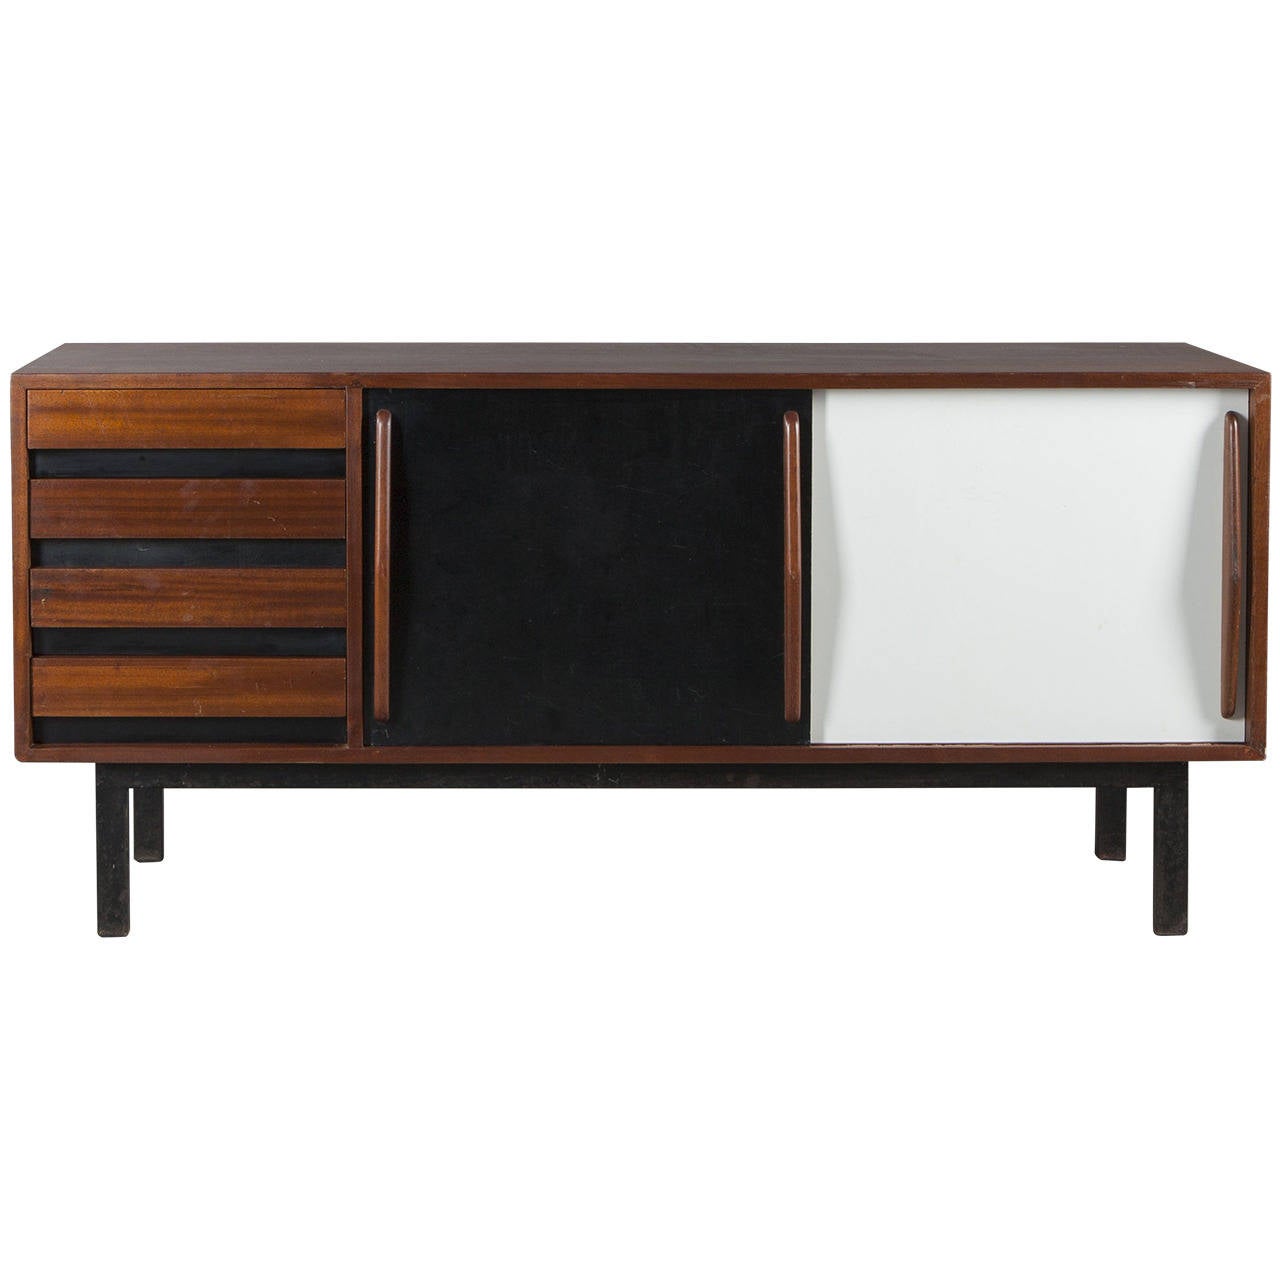 Charlotte Perriand, Enfilade Cabinet Known as "Cansado" For Sale